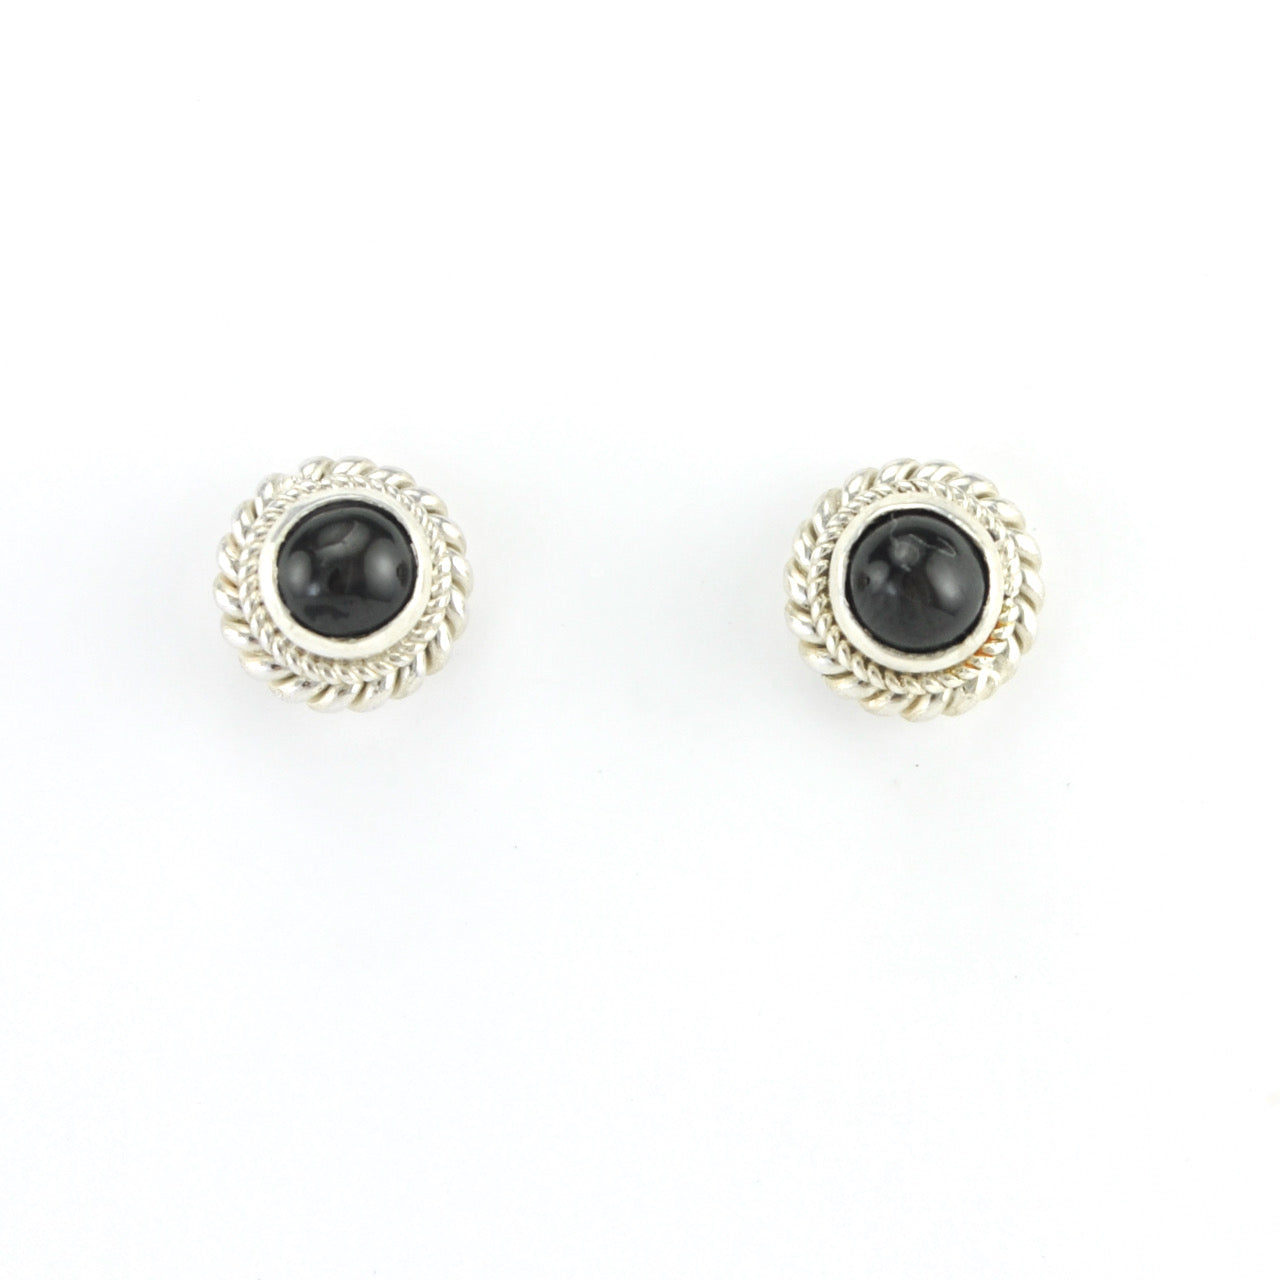 Silver Black Star Diopside 5mm Round Post Earrings